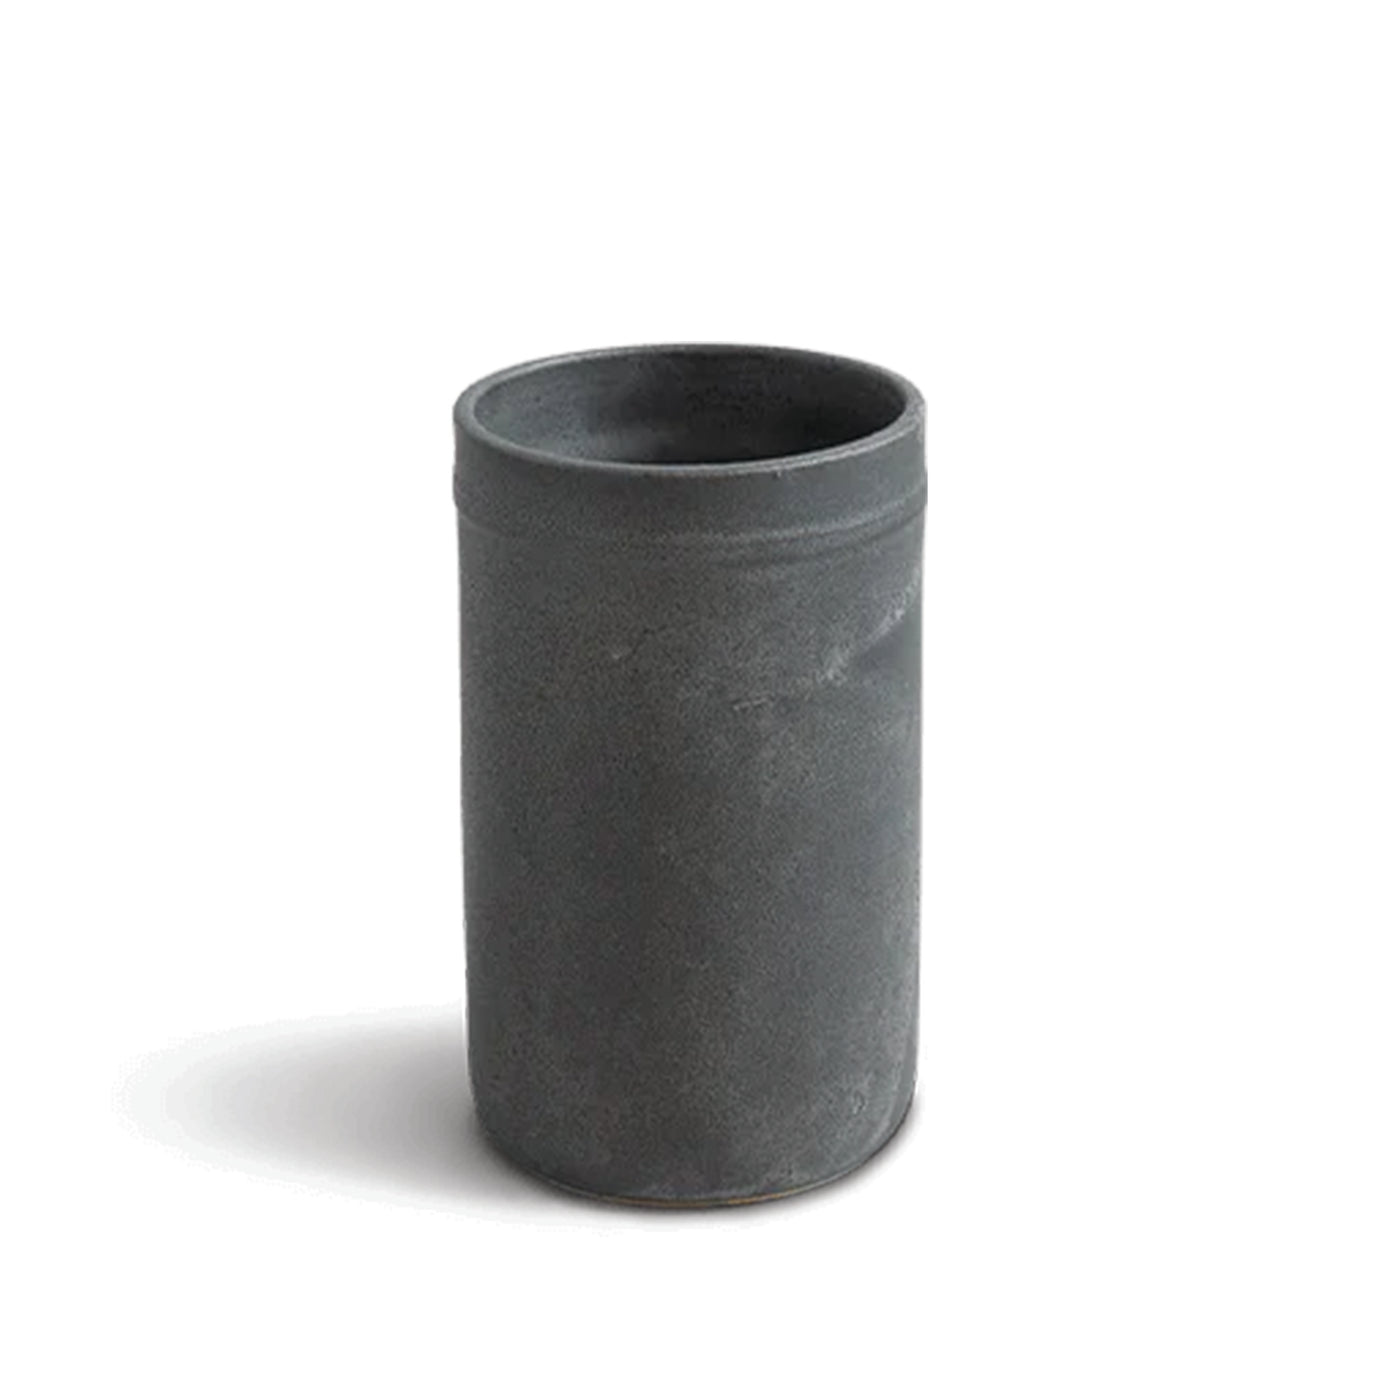 Charcoal Utensil Holder Vase by Campfire Pottery on a white background